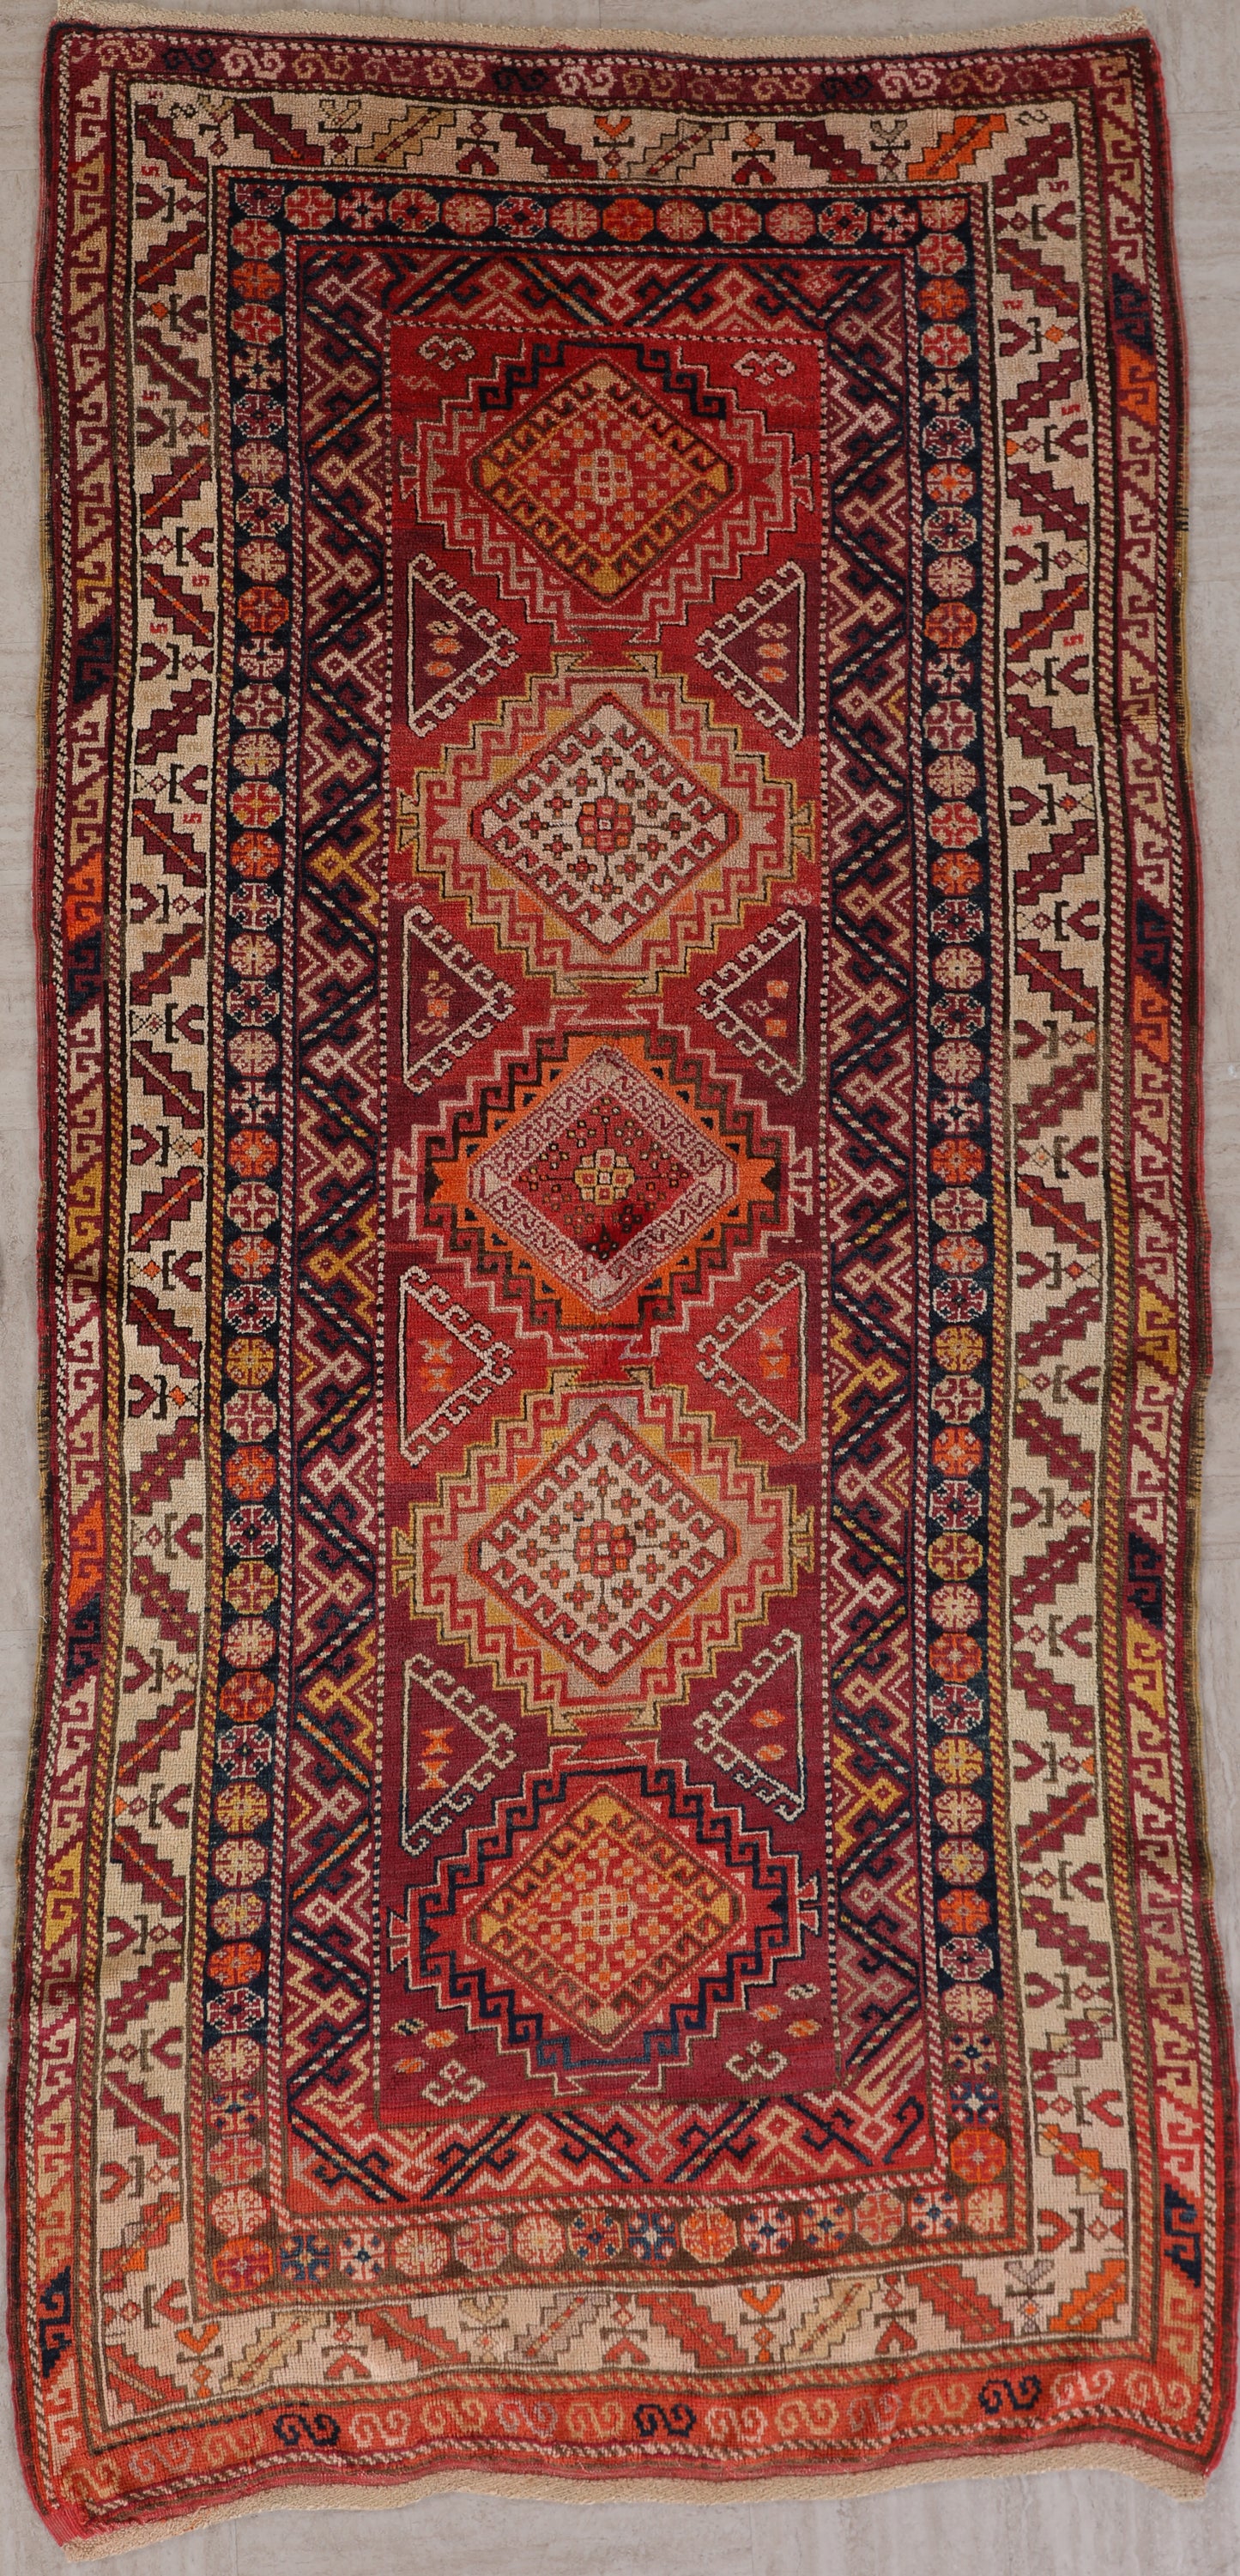 Real Armenian Antique Wool Rug product image #27615180882090